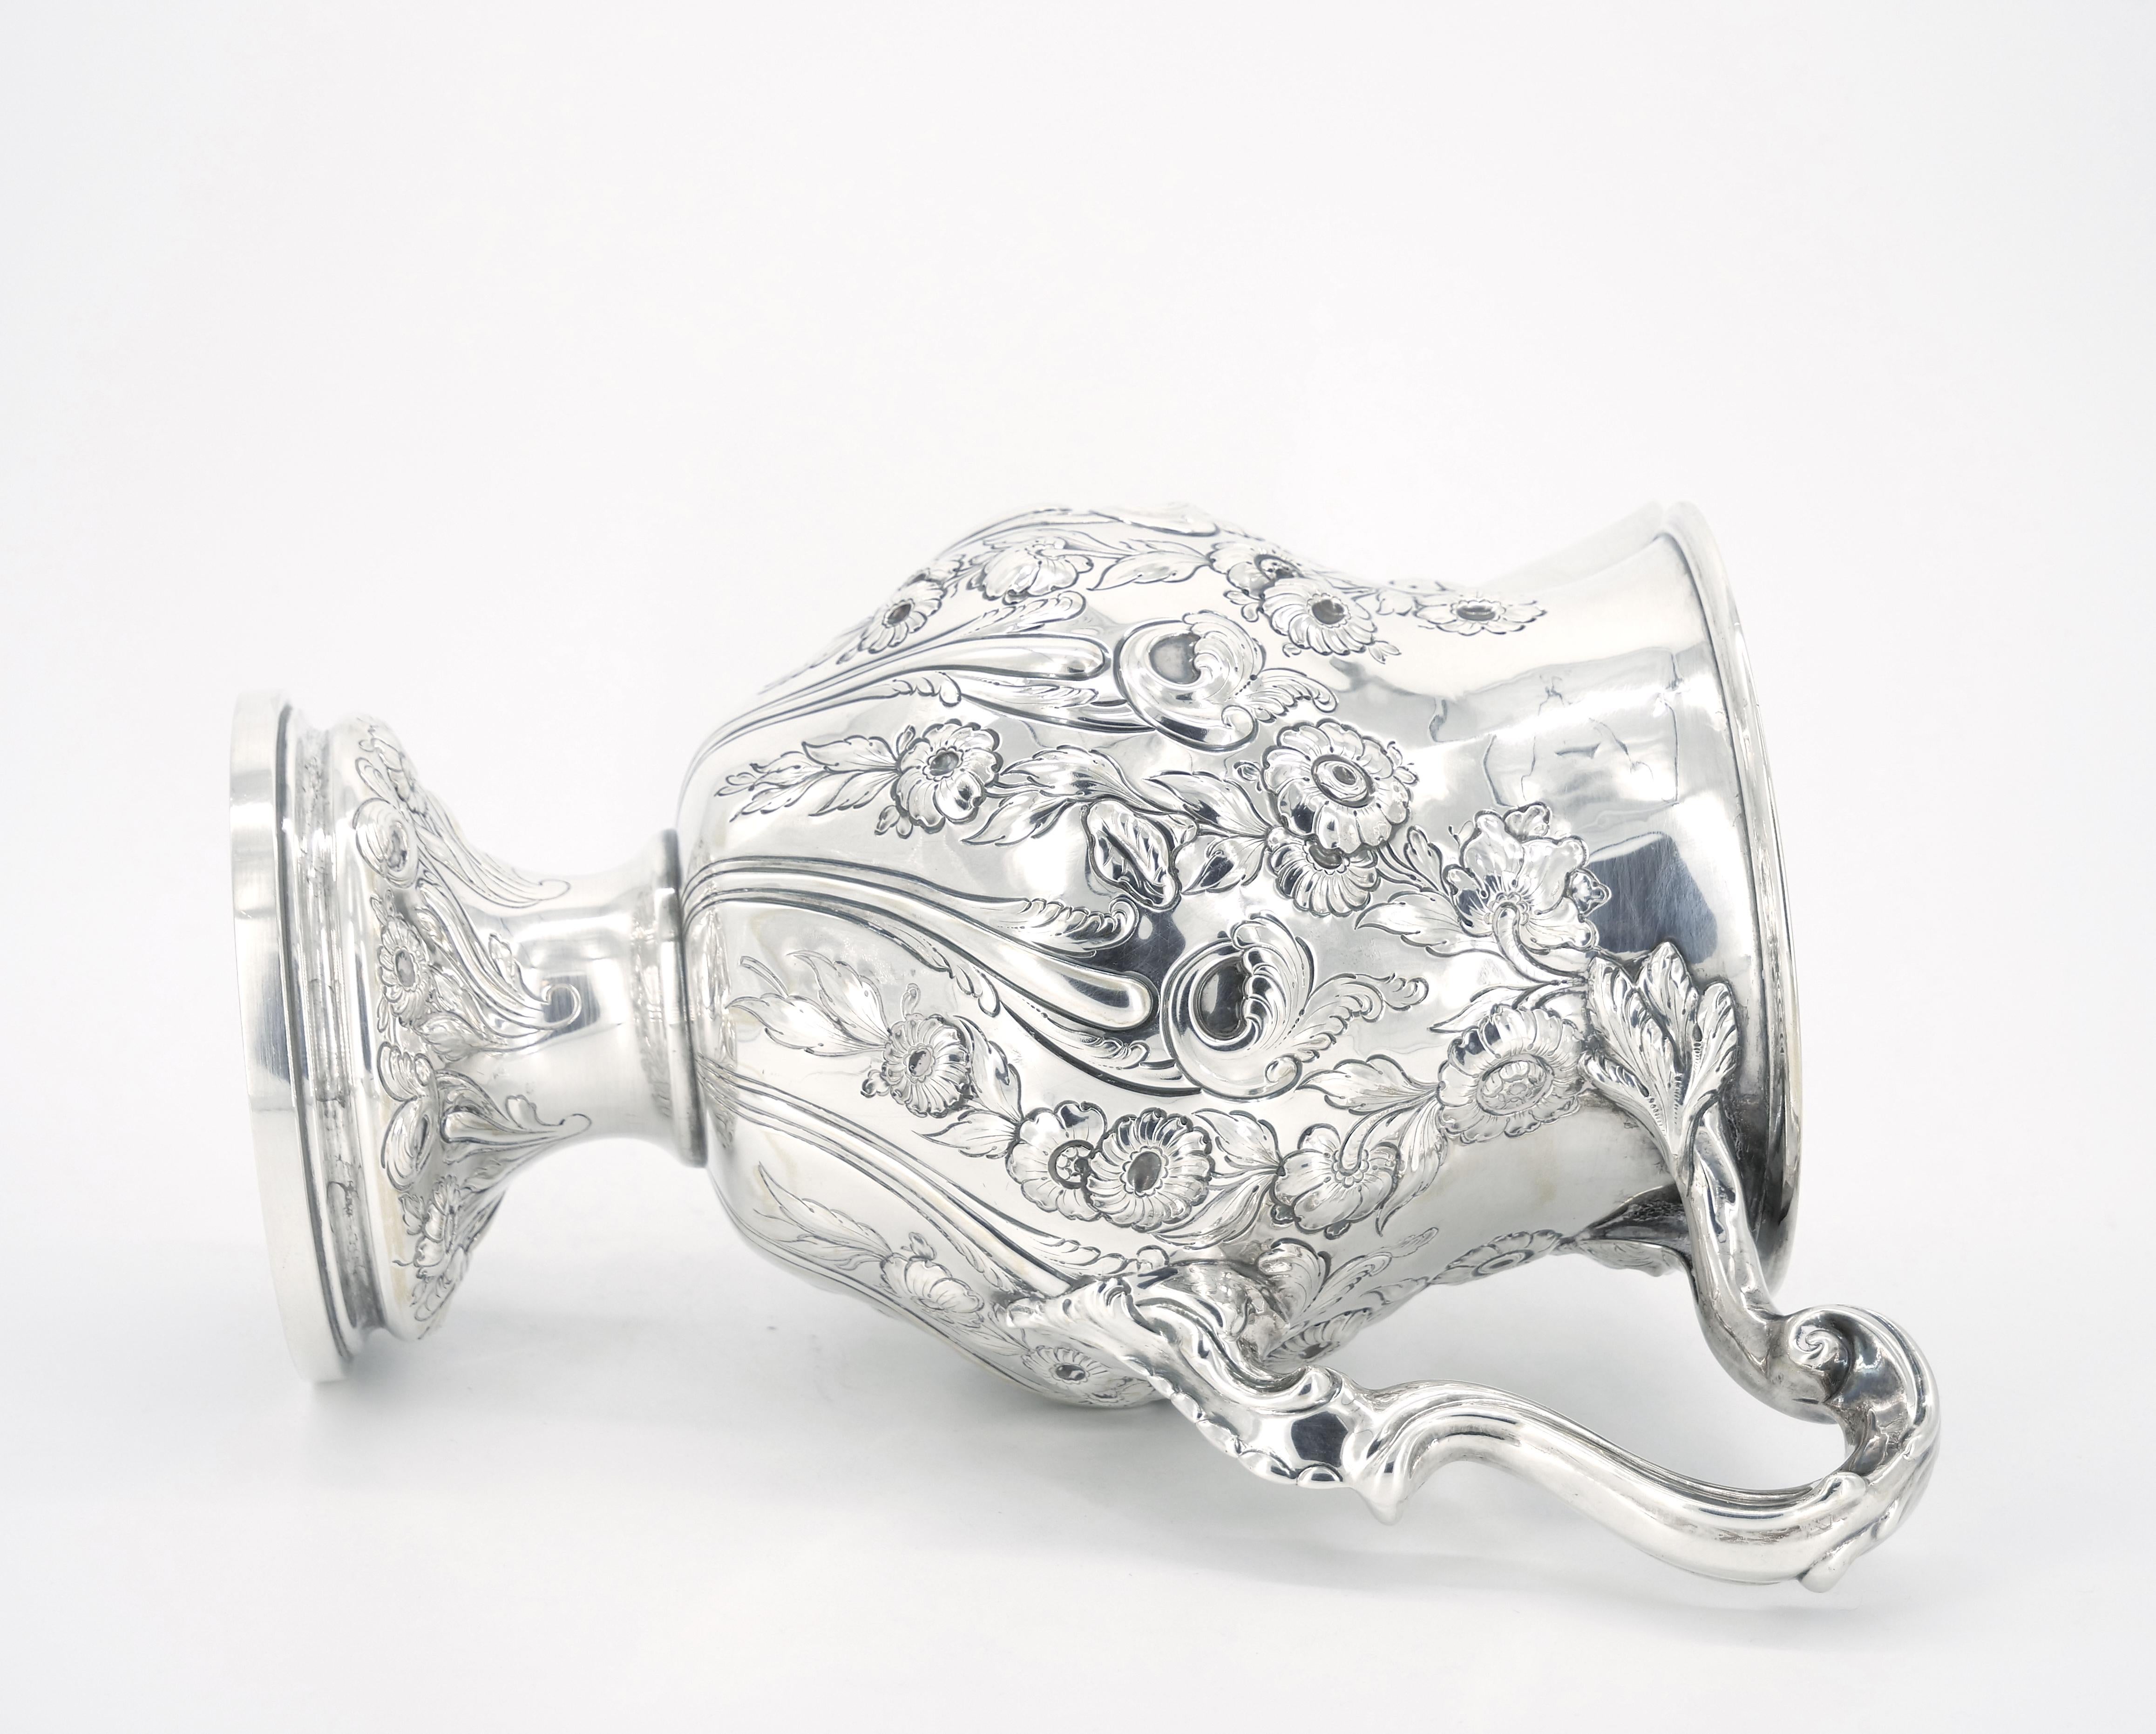 Large 19th Century Sterling Silver Serving Water Pitcher / Victorian Style In Good Condition For Sale In Tarry Town, NY